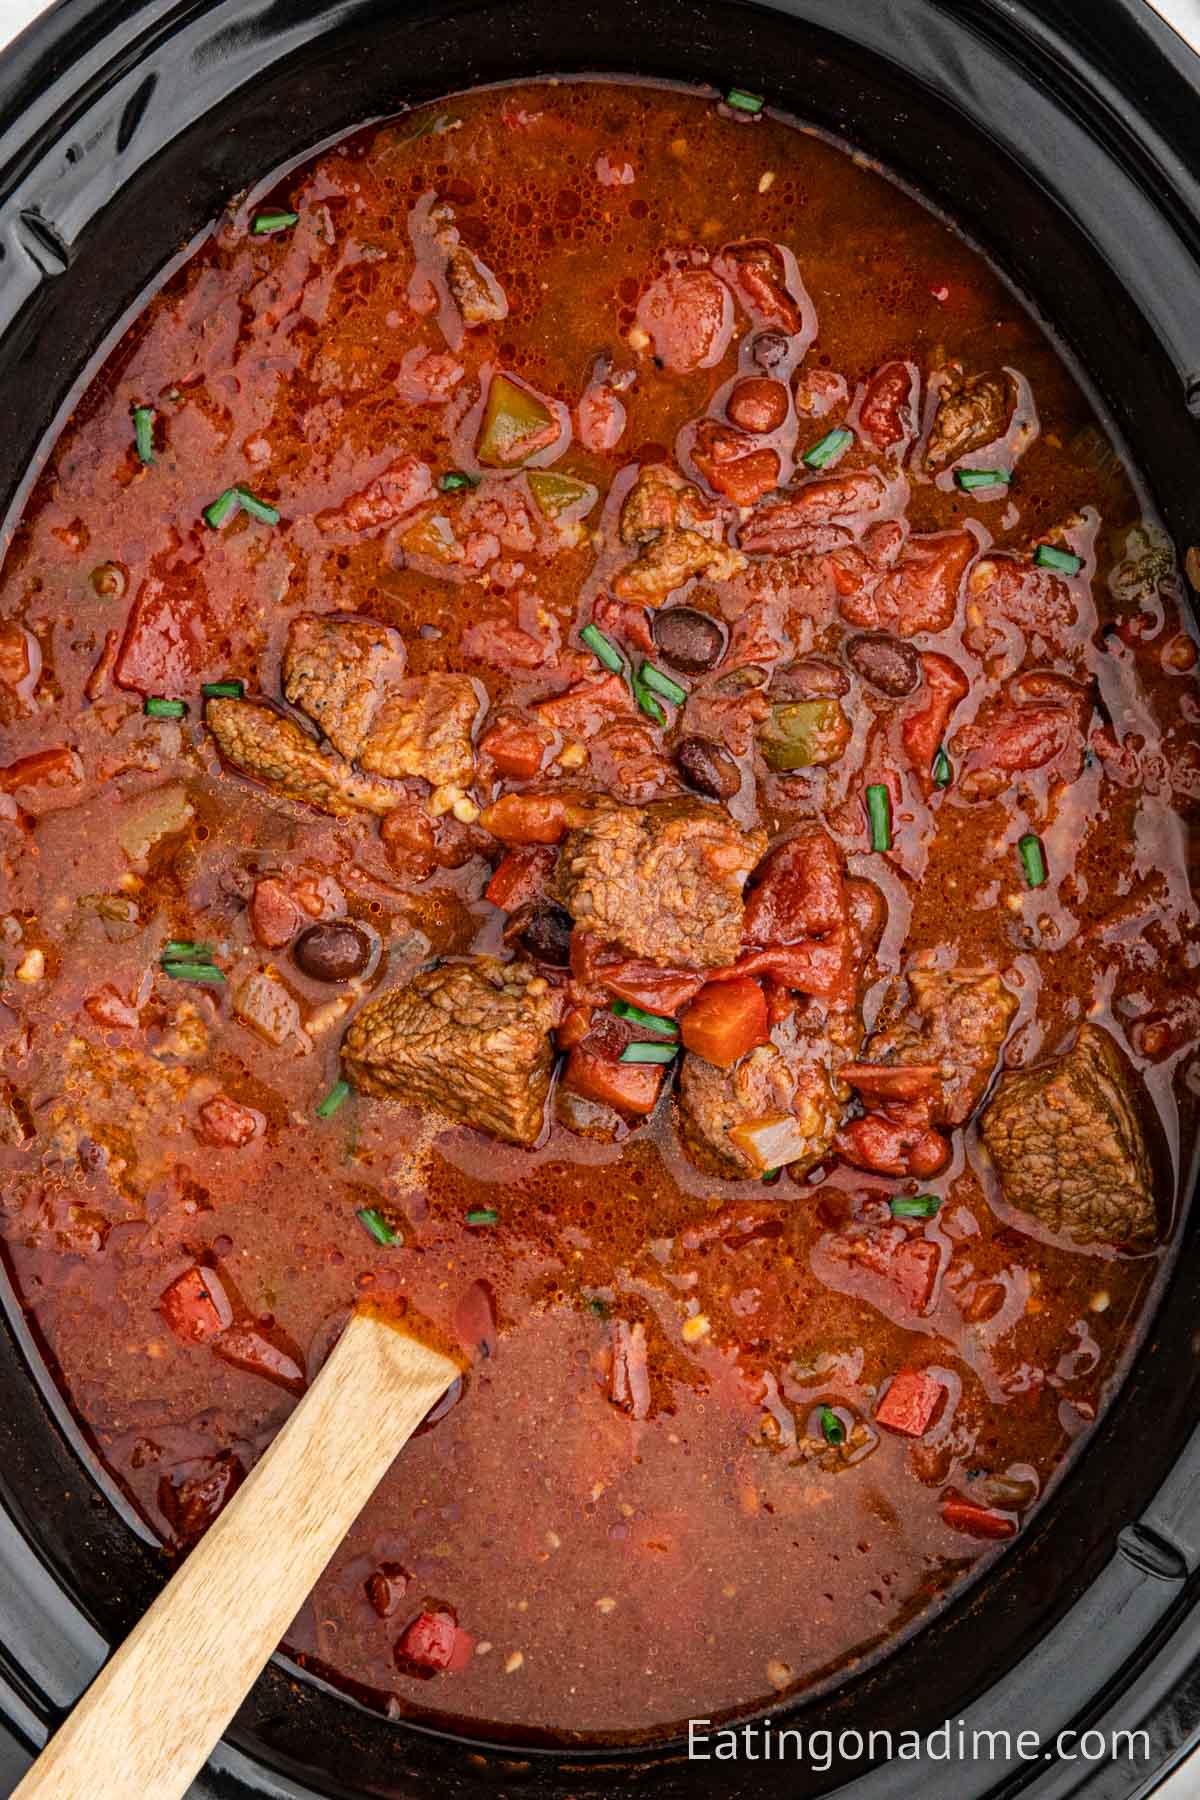 Brisket Chili in the slow cooker